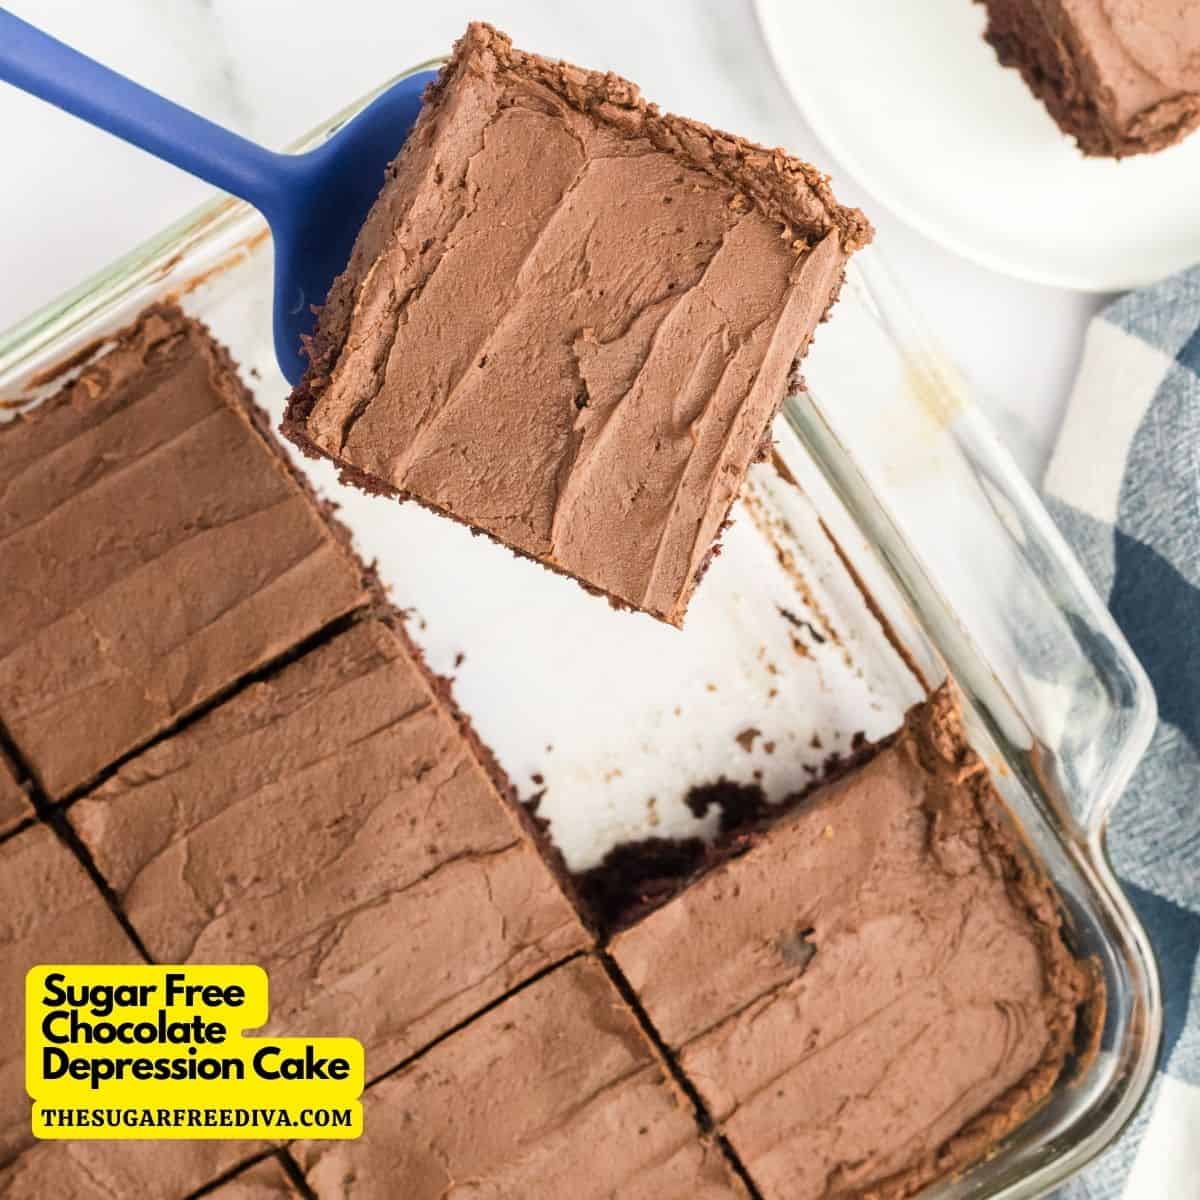 Sugar Free Chocolate Depression Cake, aka wacky cake, is a simple and delicious dessert recipe made without eggs or sugar.